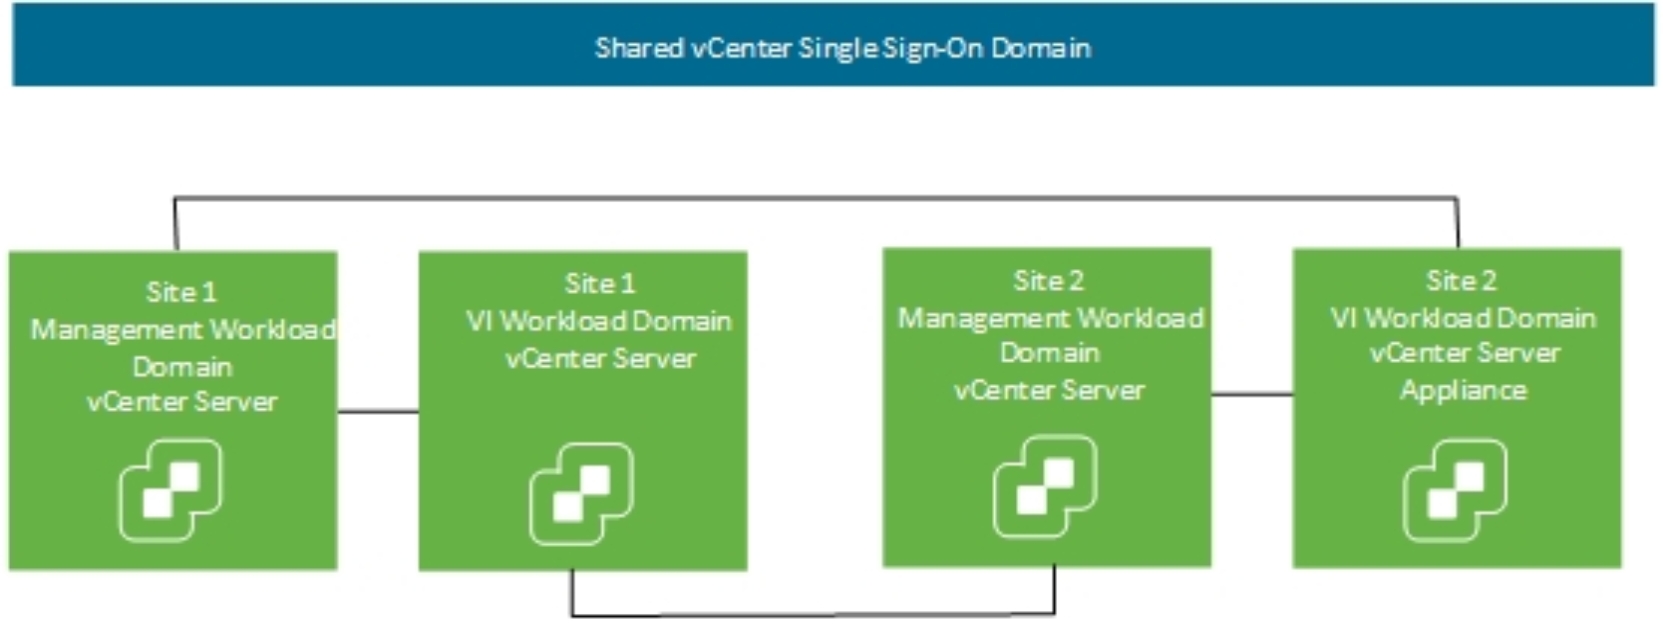 This figure shows a shared SSO domain.